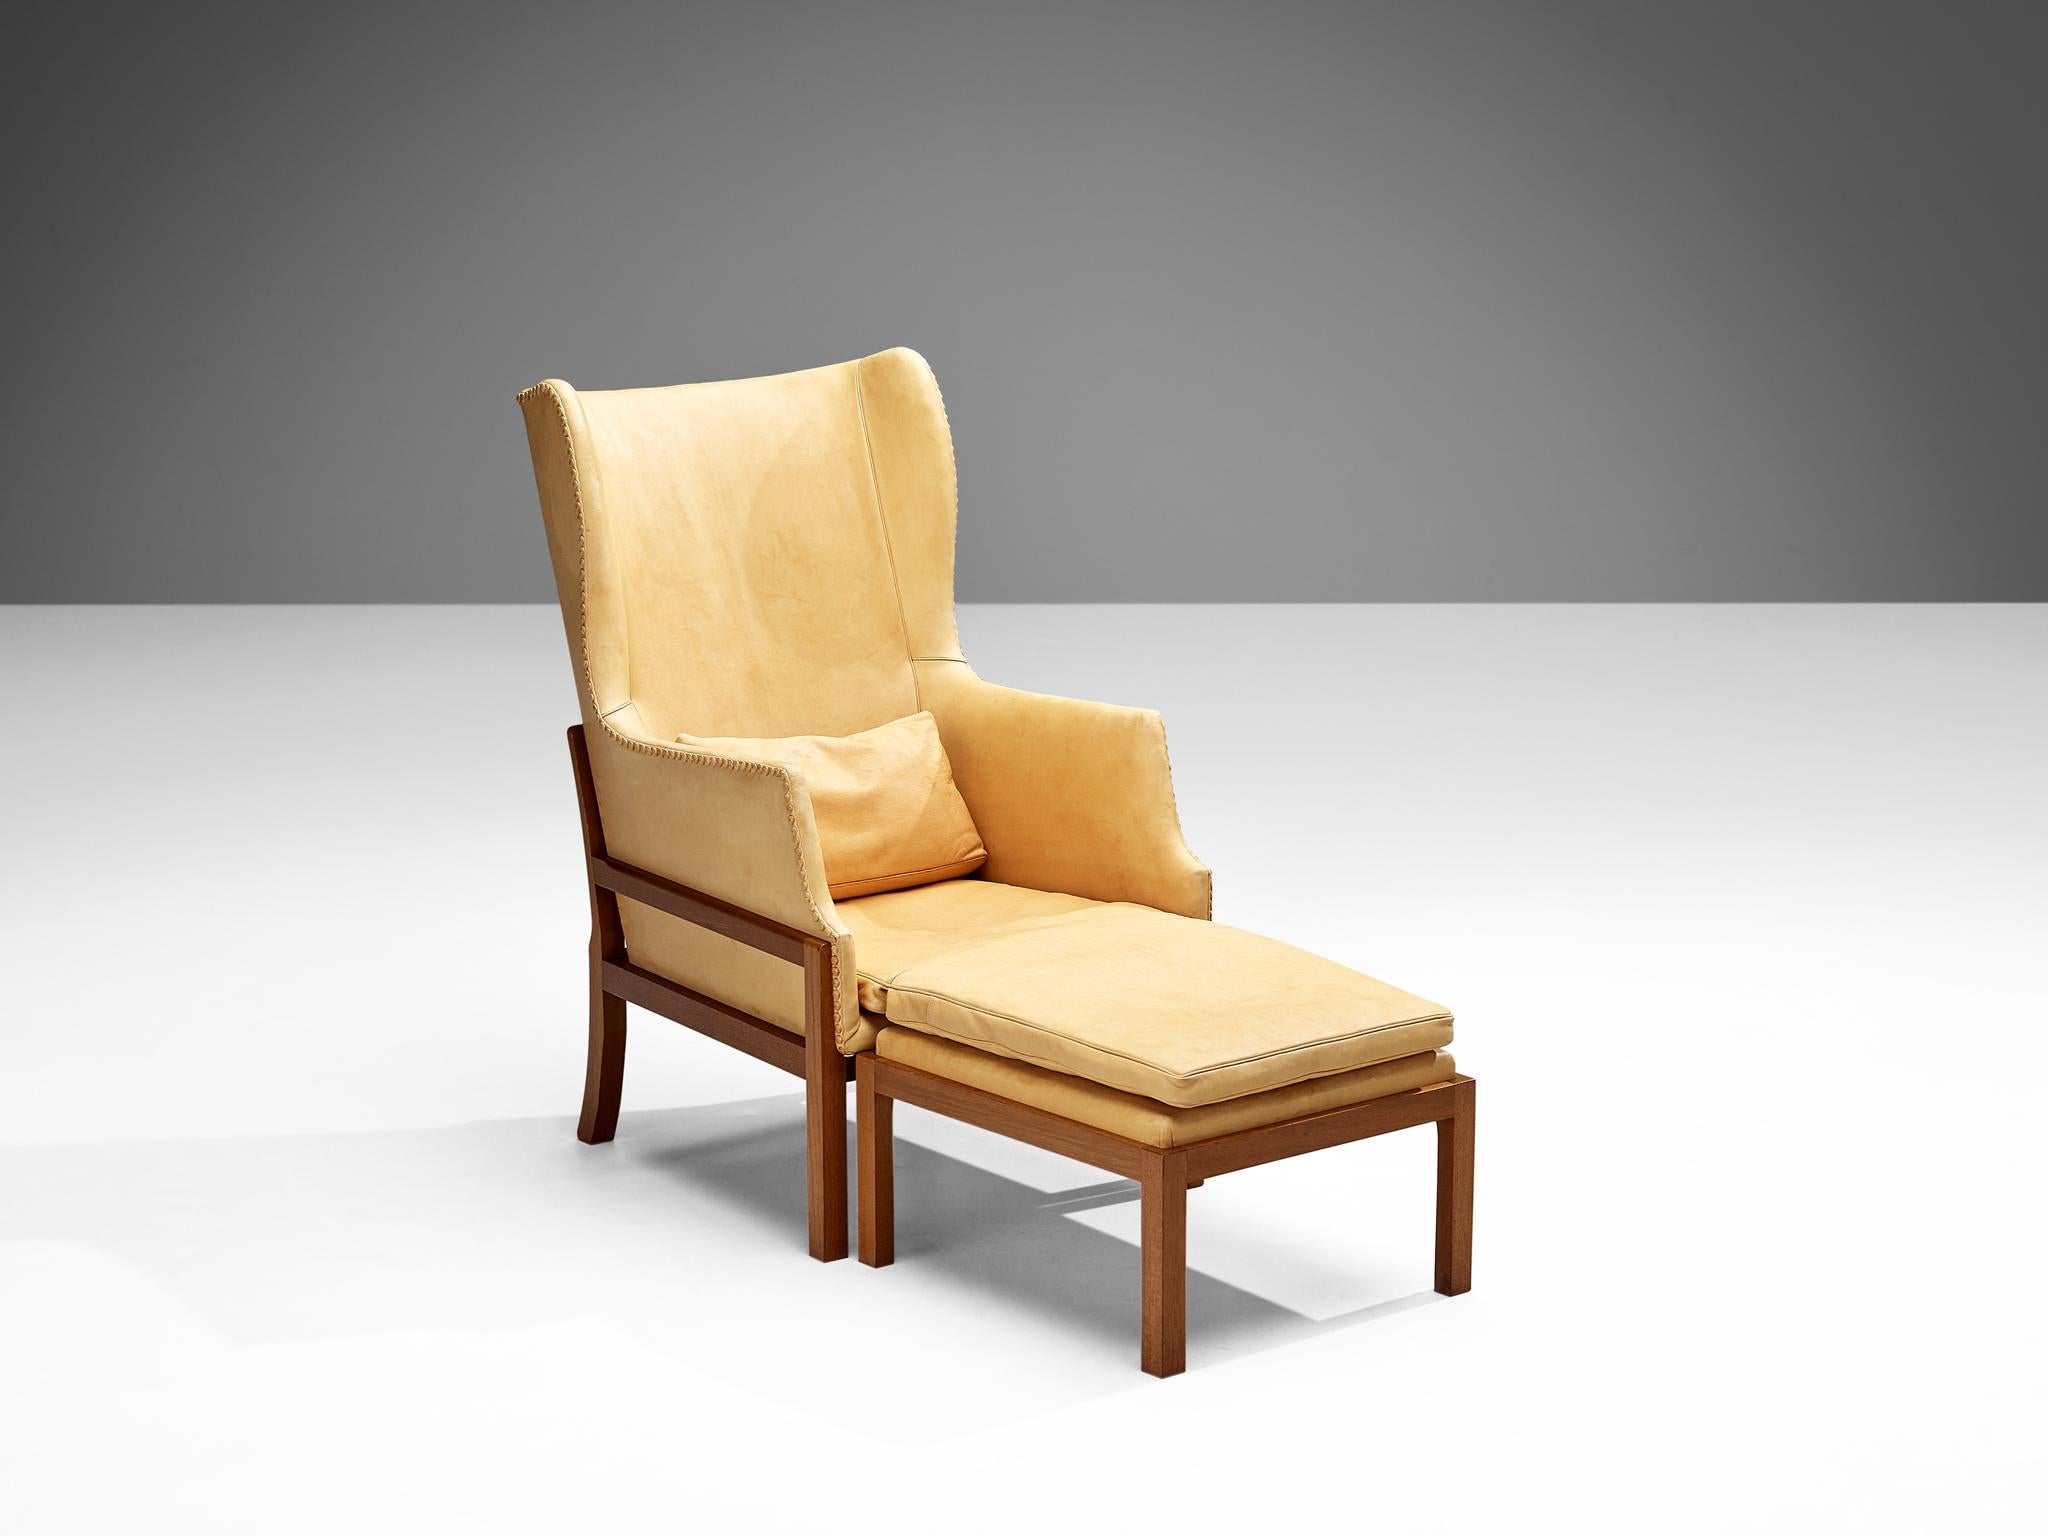 Mogens Koch for K. Ivan Schlechter, 'fireside' wingback lounge chair and ottoman, model MK50, mahogany, leather, Denmark, design 1936, production 1964-1979.

Mogens Koch's wingback chair was inspired by Kaare Klint's furniture design, which in turn